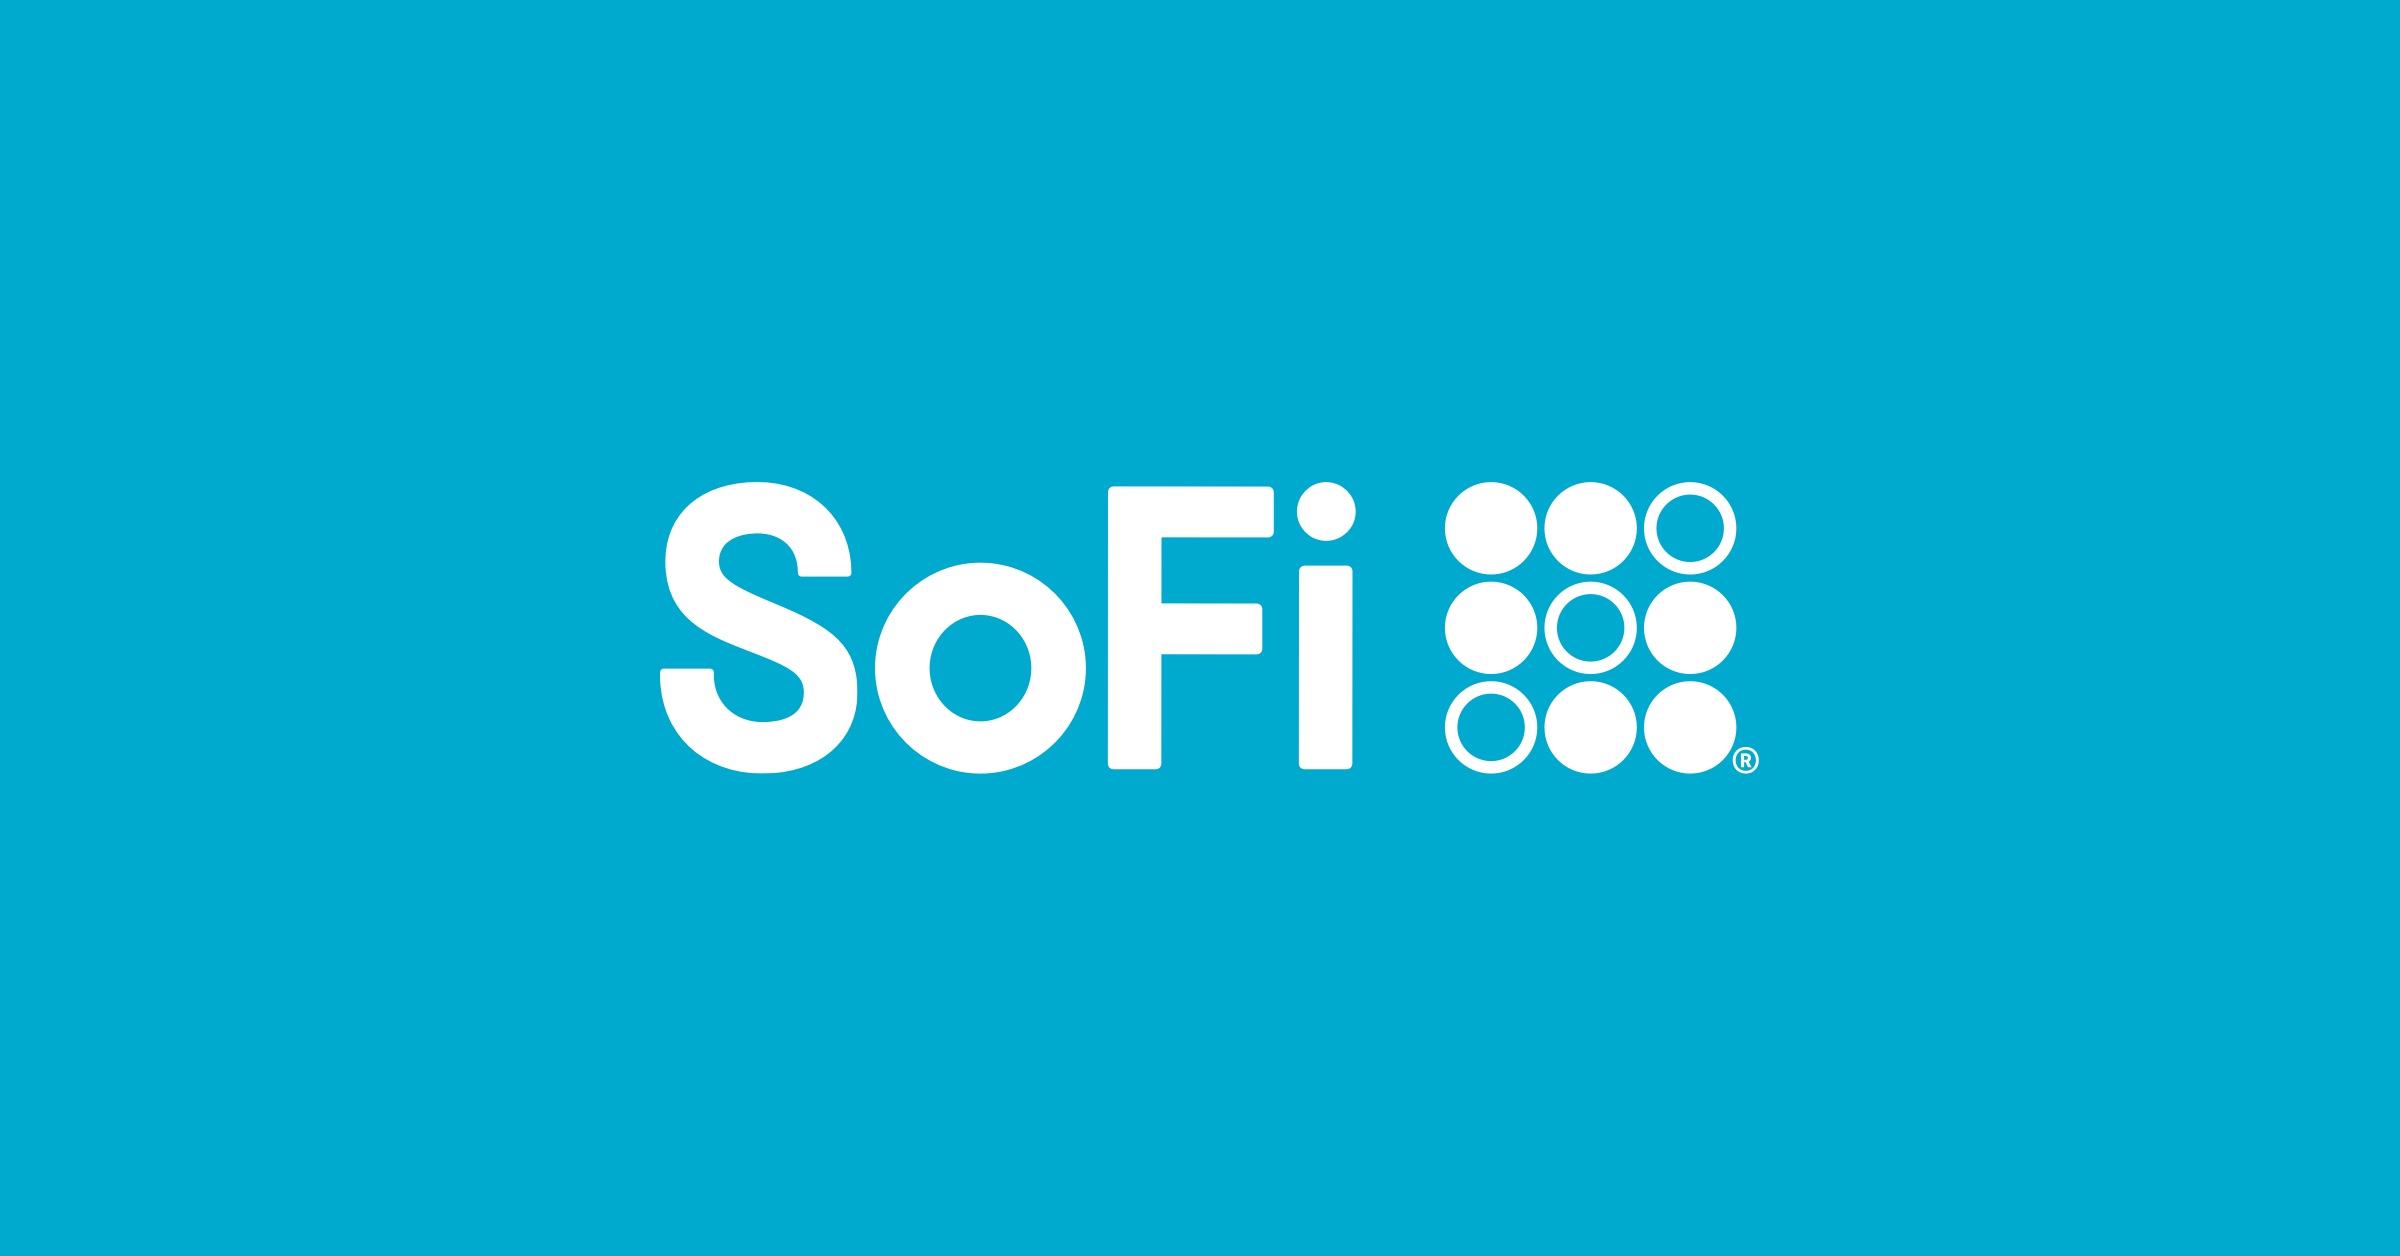 SoFi Personal Loans: Up to $100,000 for the Greatest Needs